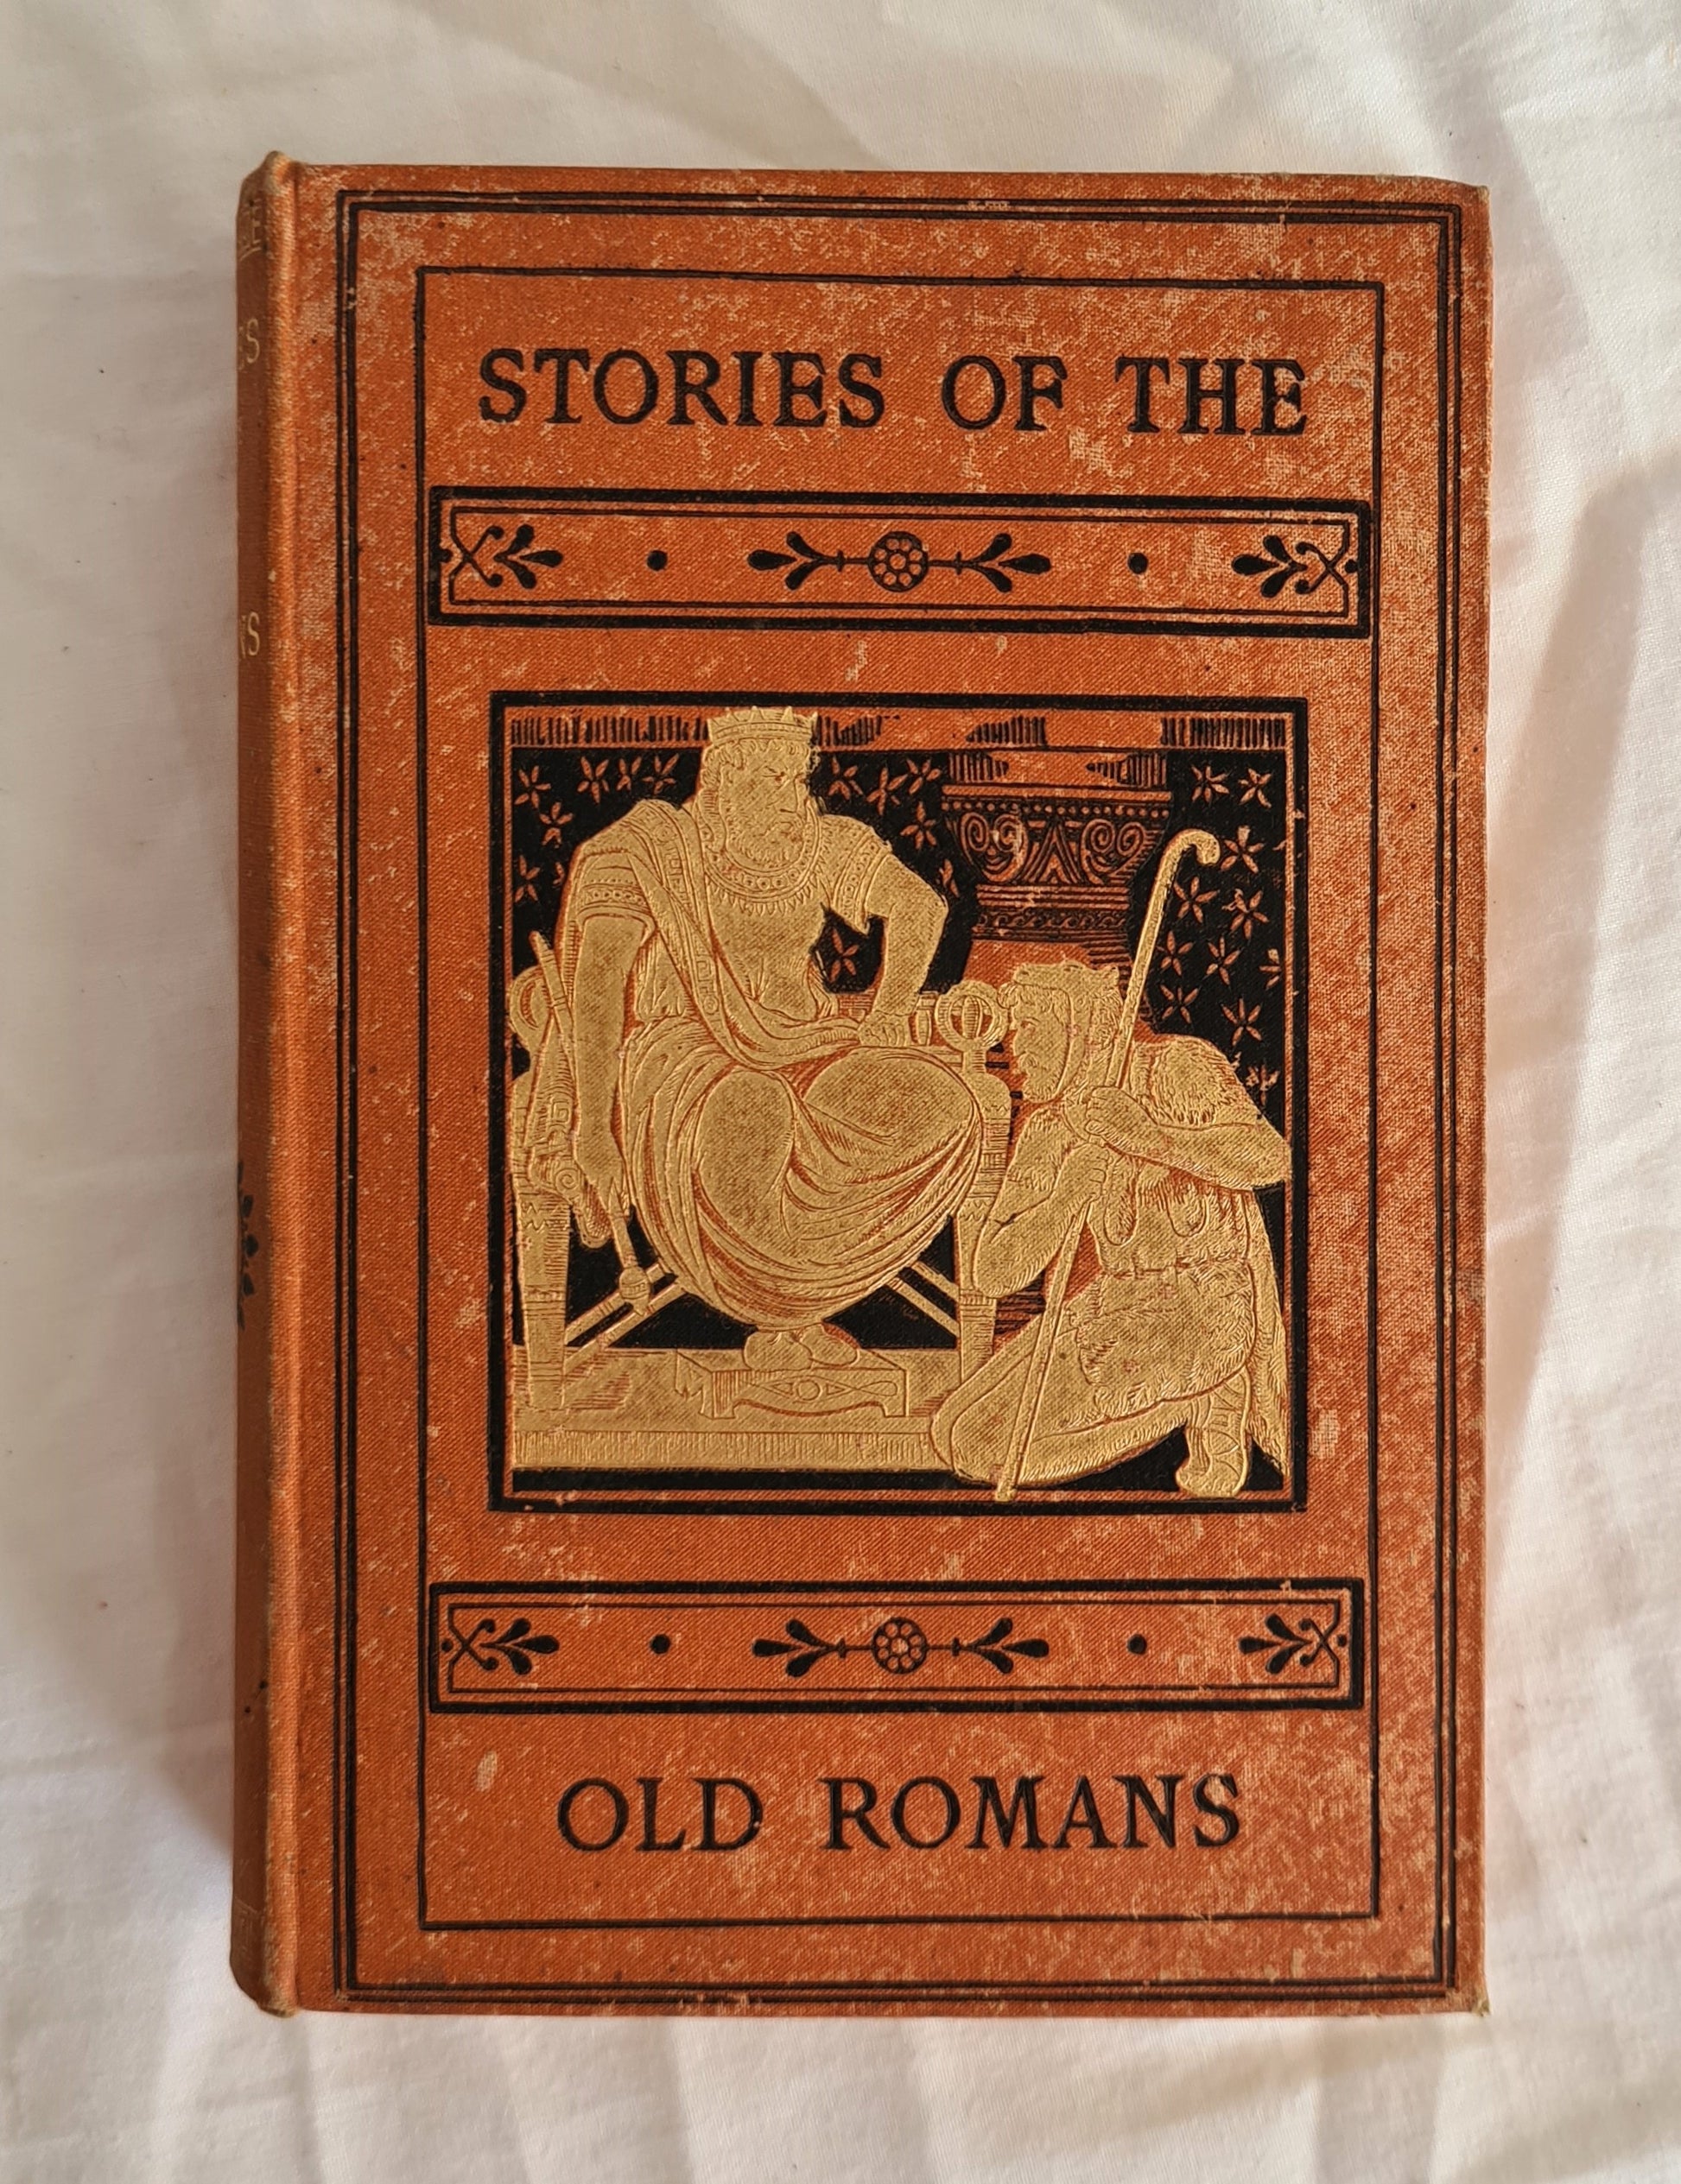 Stories of the Old Romans  By the Author of “Tales of Heroes and Great Men of Old”  by S. S. Pugh